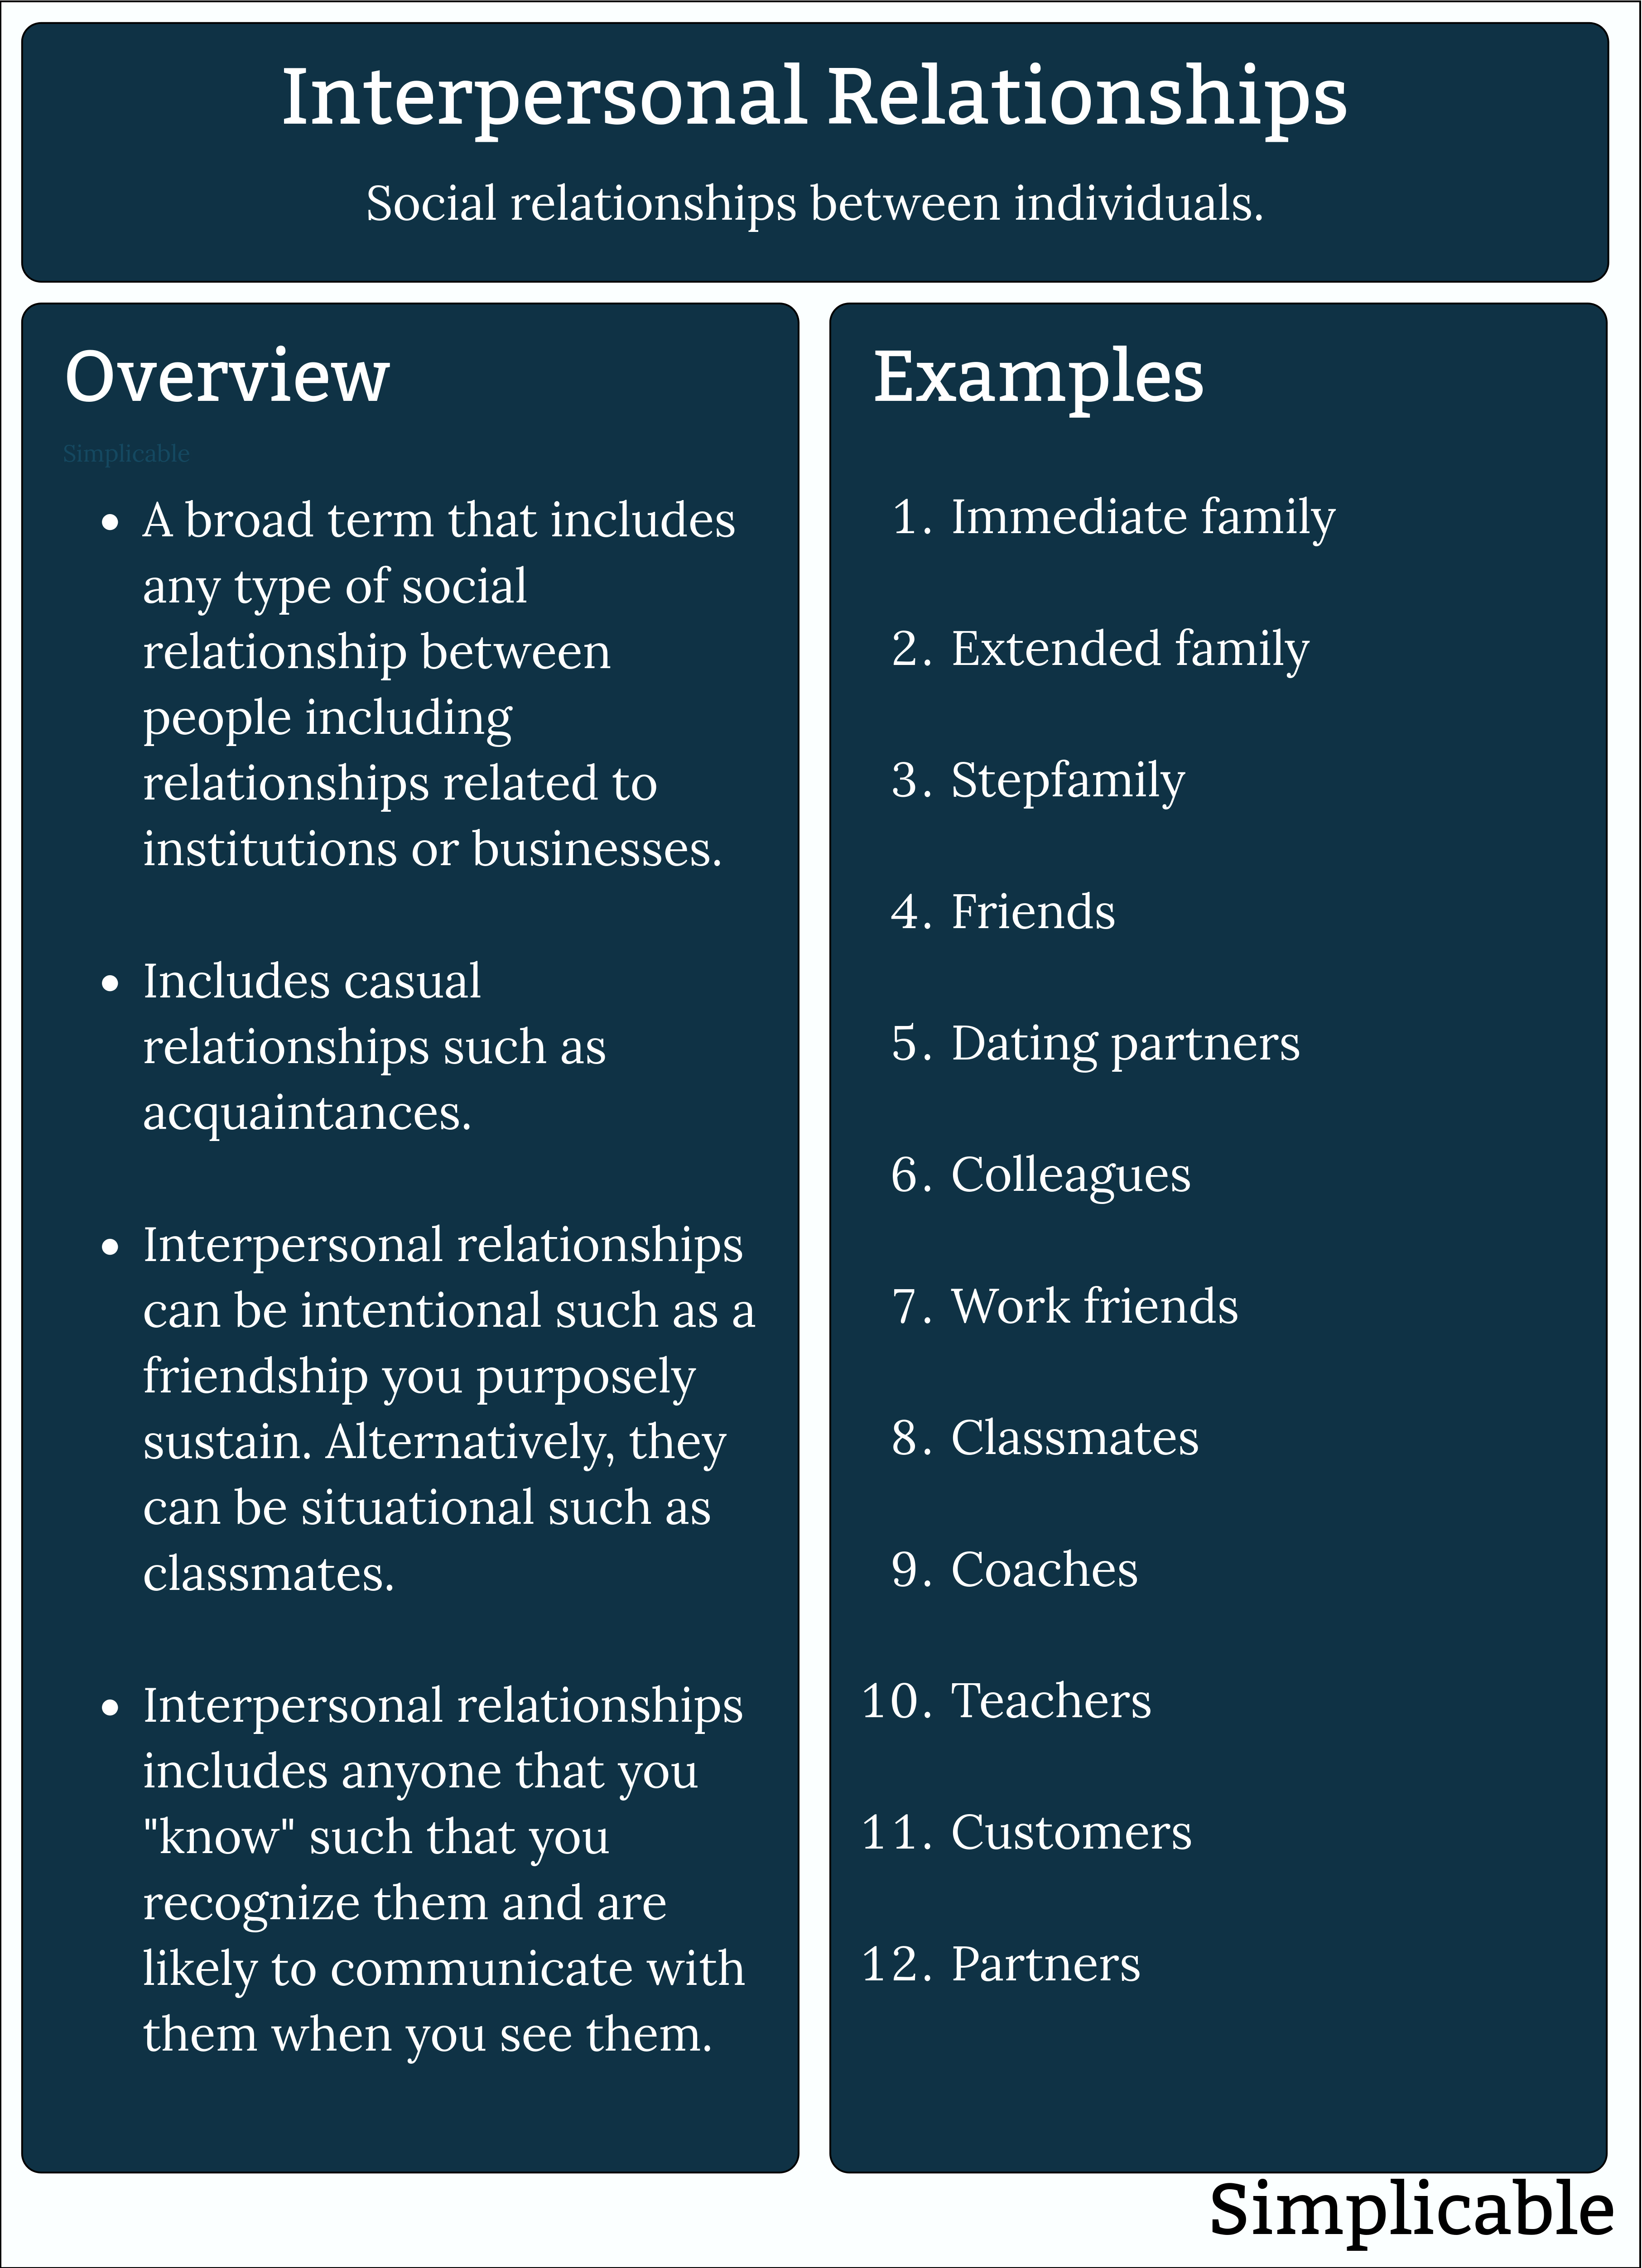 interpersonal relationships overview and examples